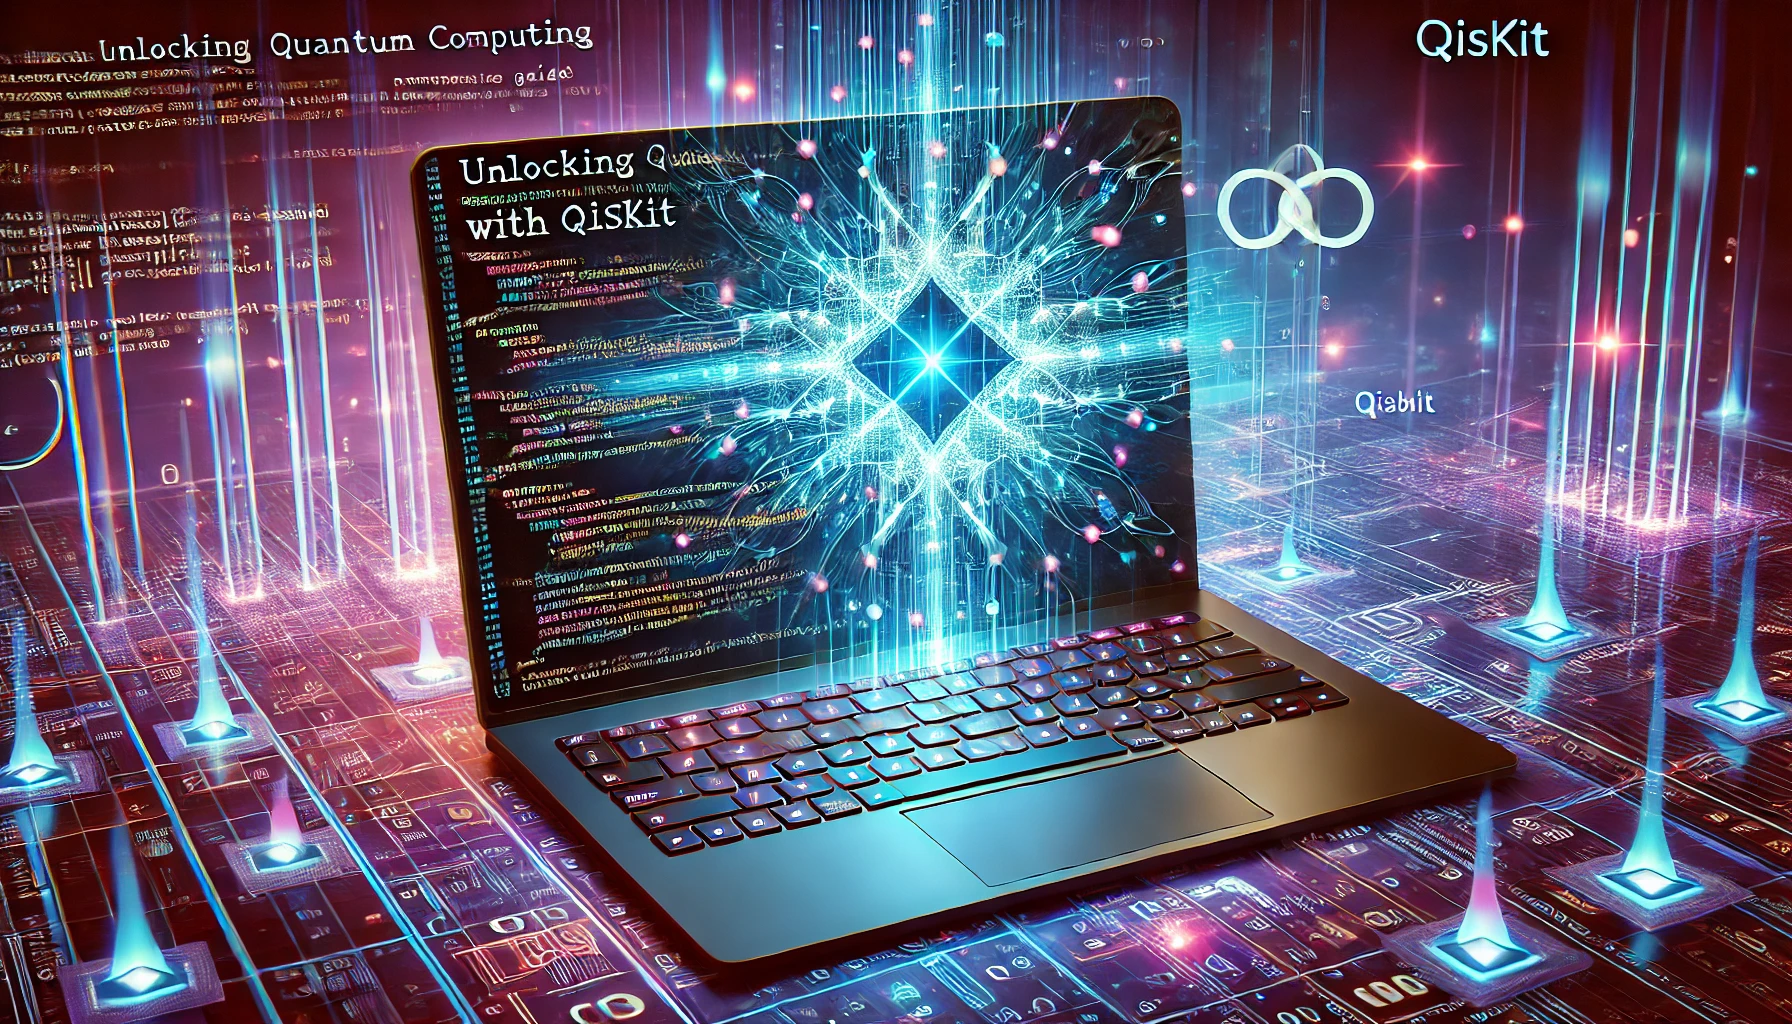 quantum computing with our detailed guide on Qiskit. Learn the basics, explore key features, and understand how to get started with this powerful open-source framework.